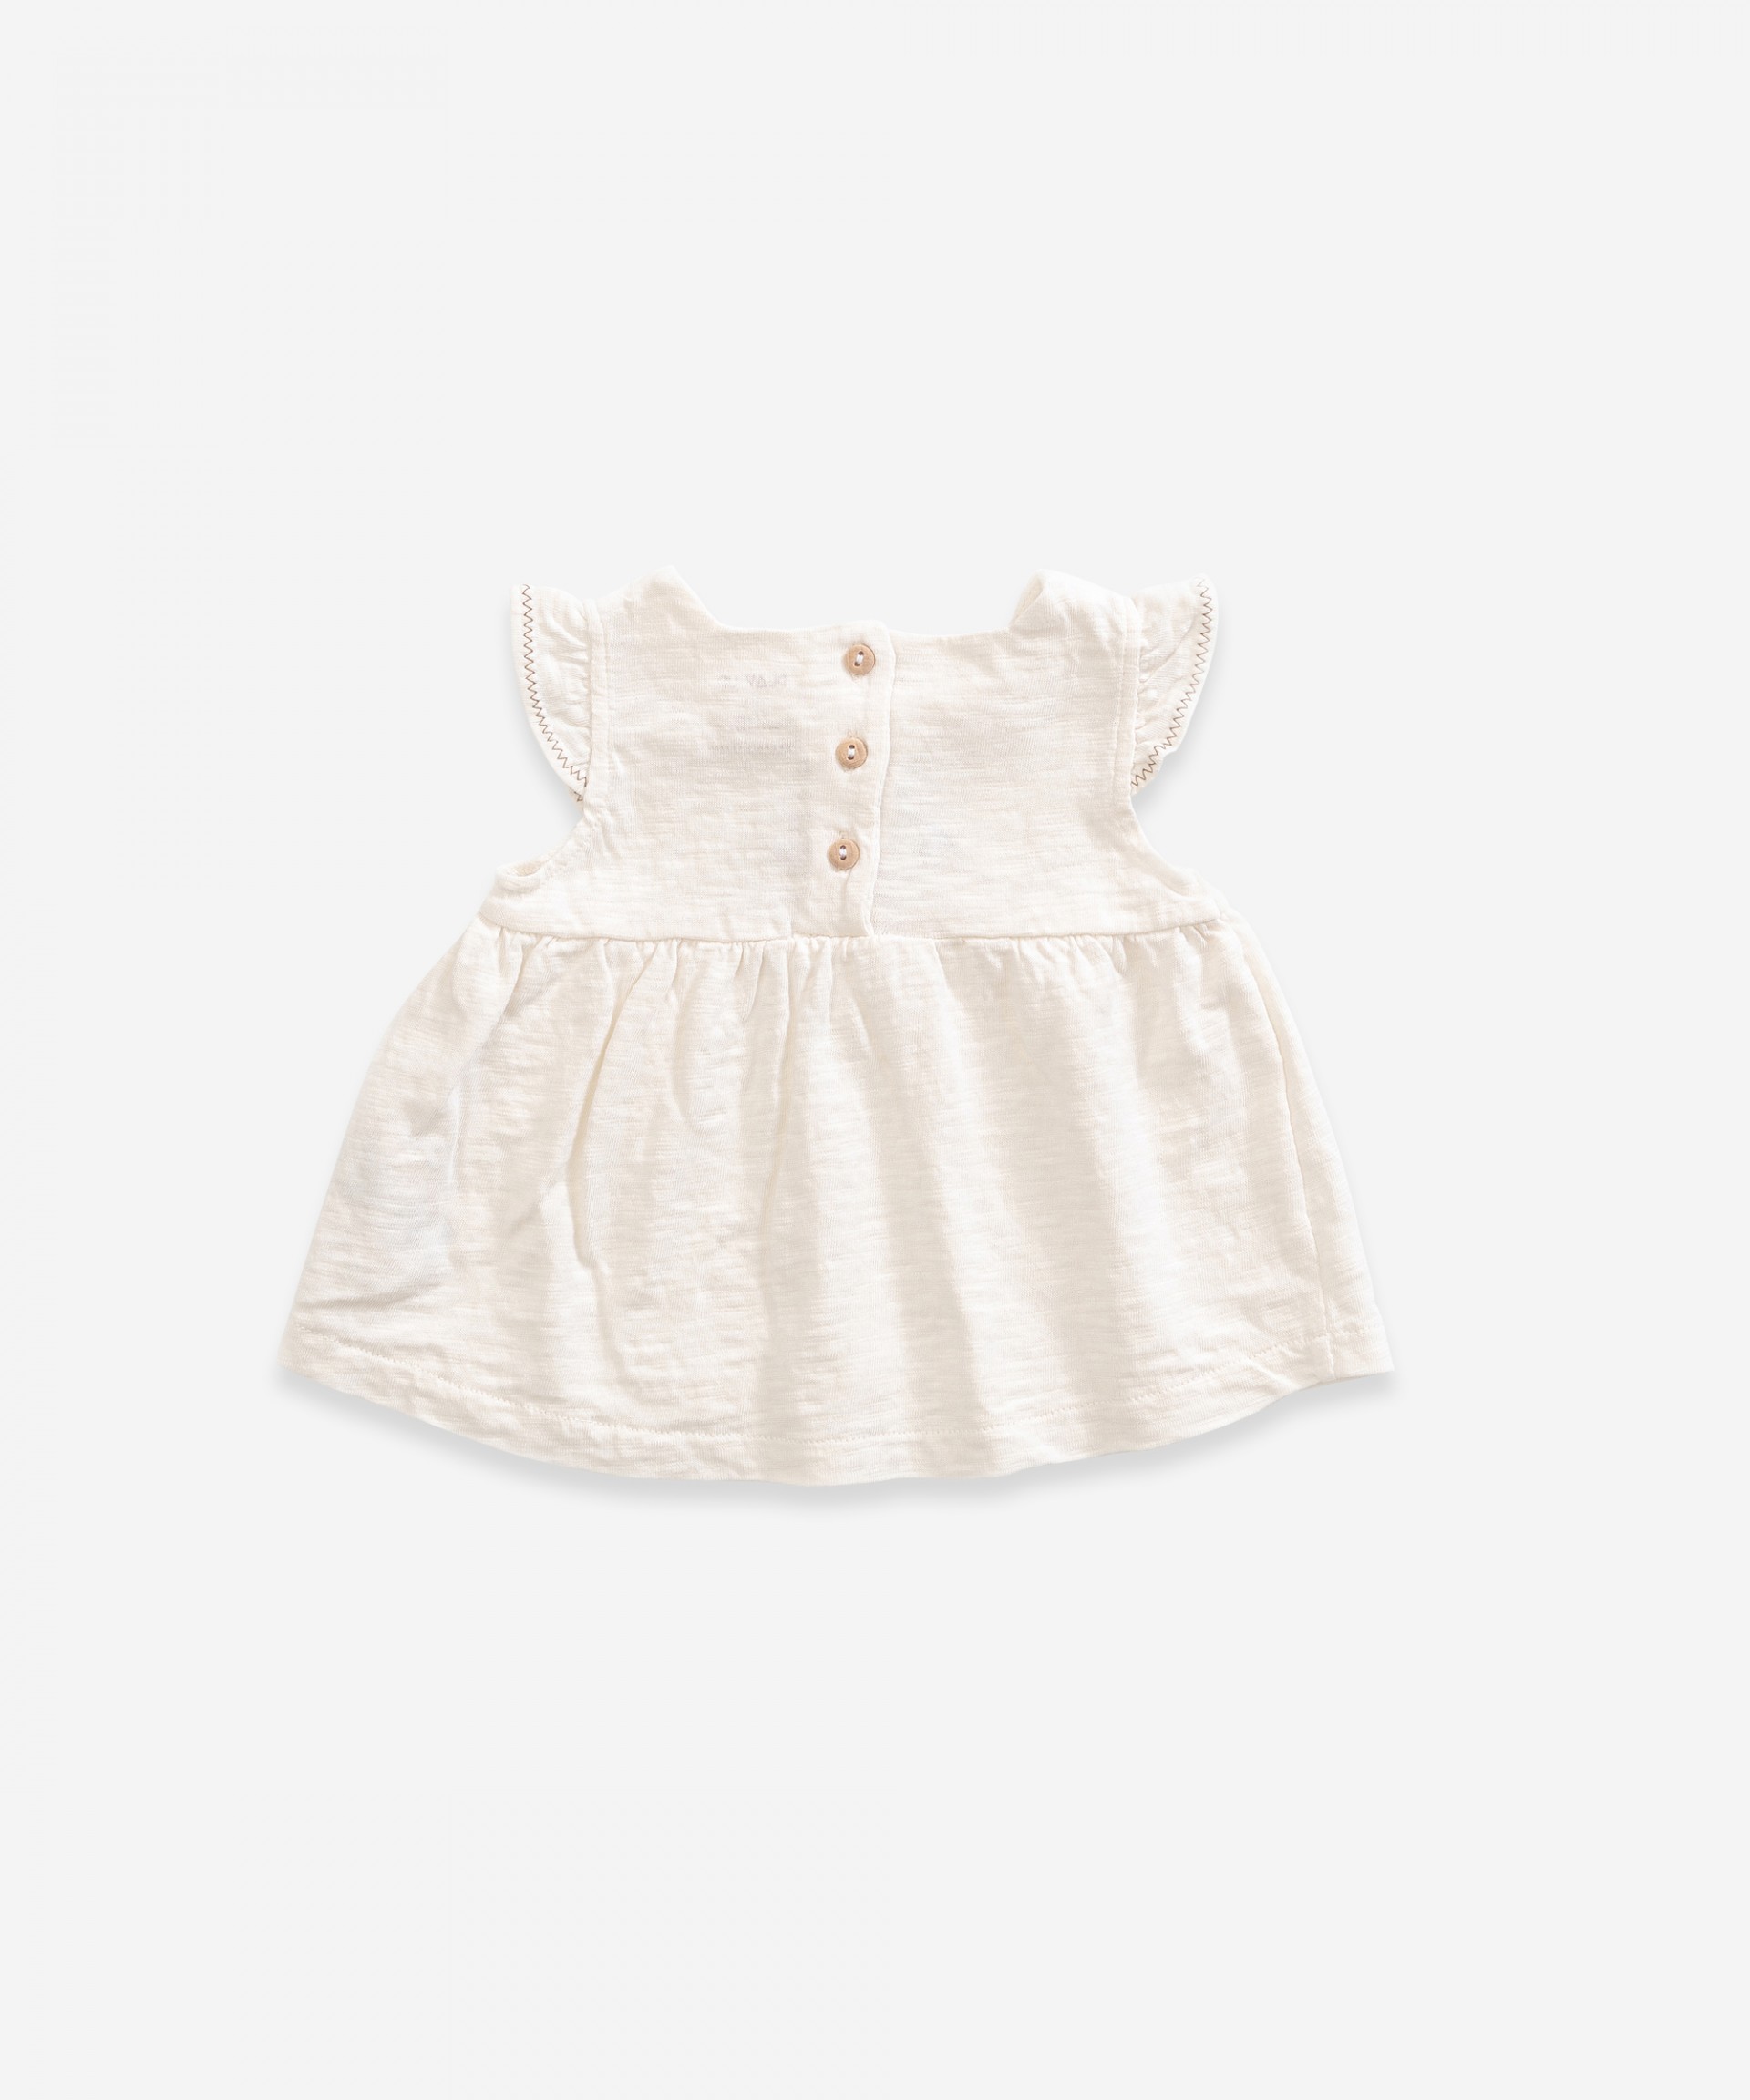 Top with frill on shoulders | Weaving